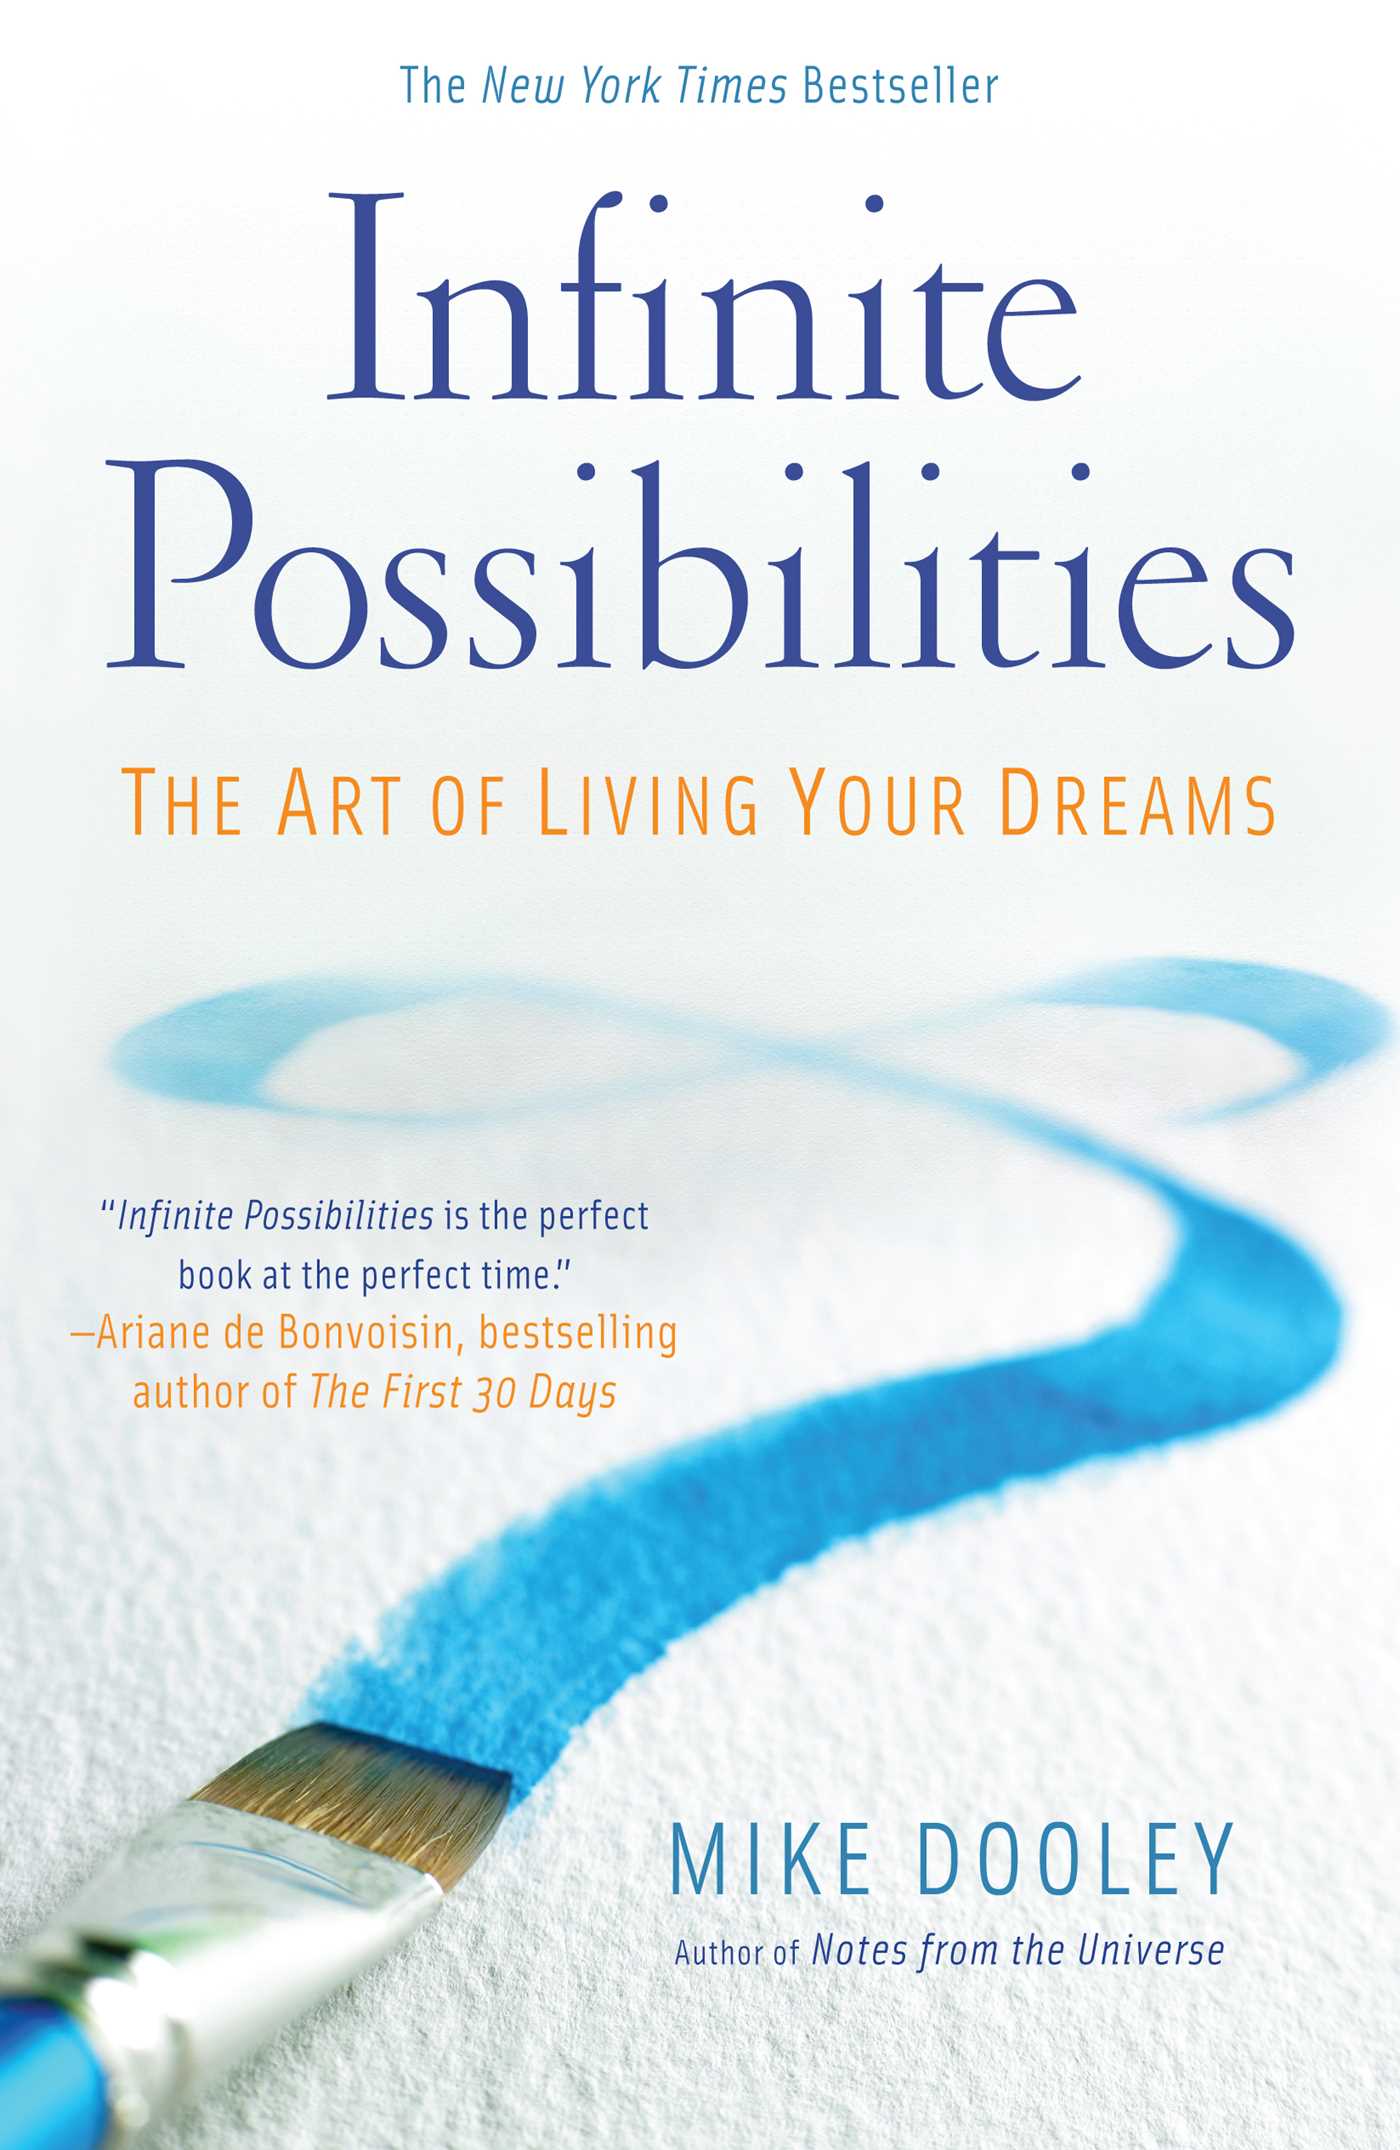 Infinite Possibilities eBook by Mike Dooley | Official Publisher ...